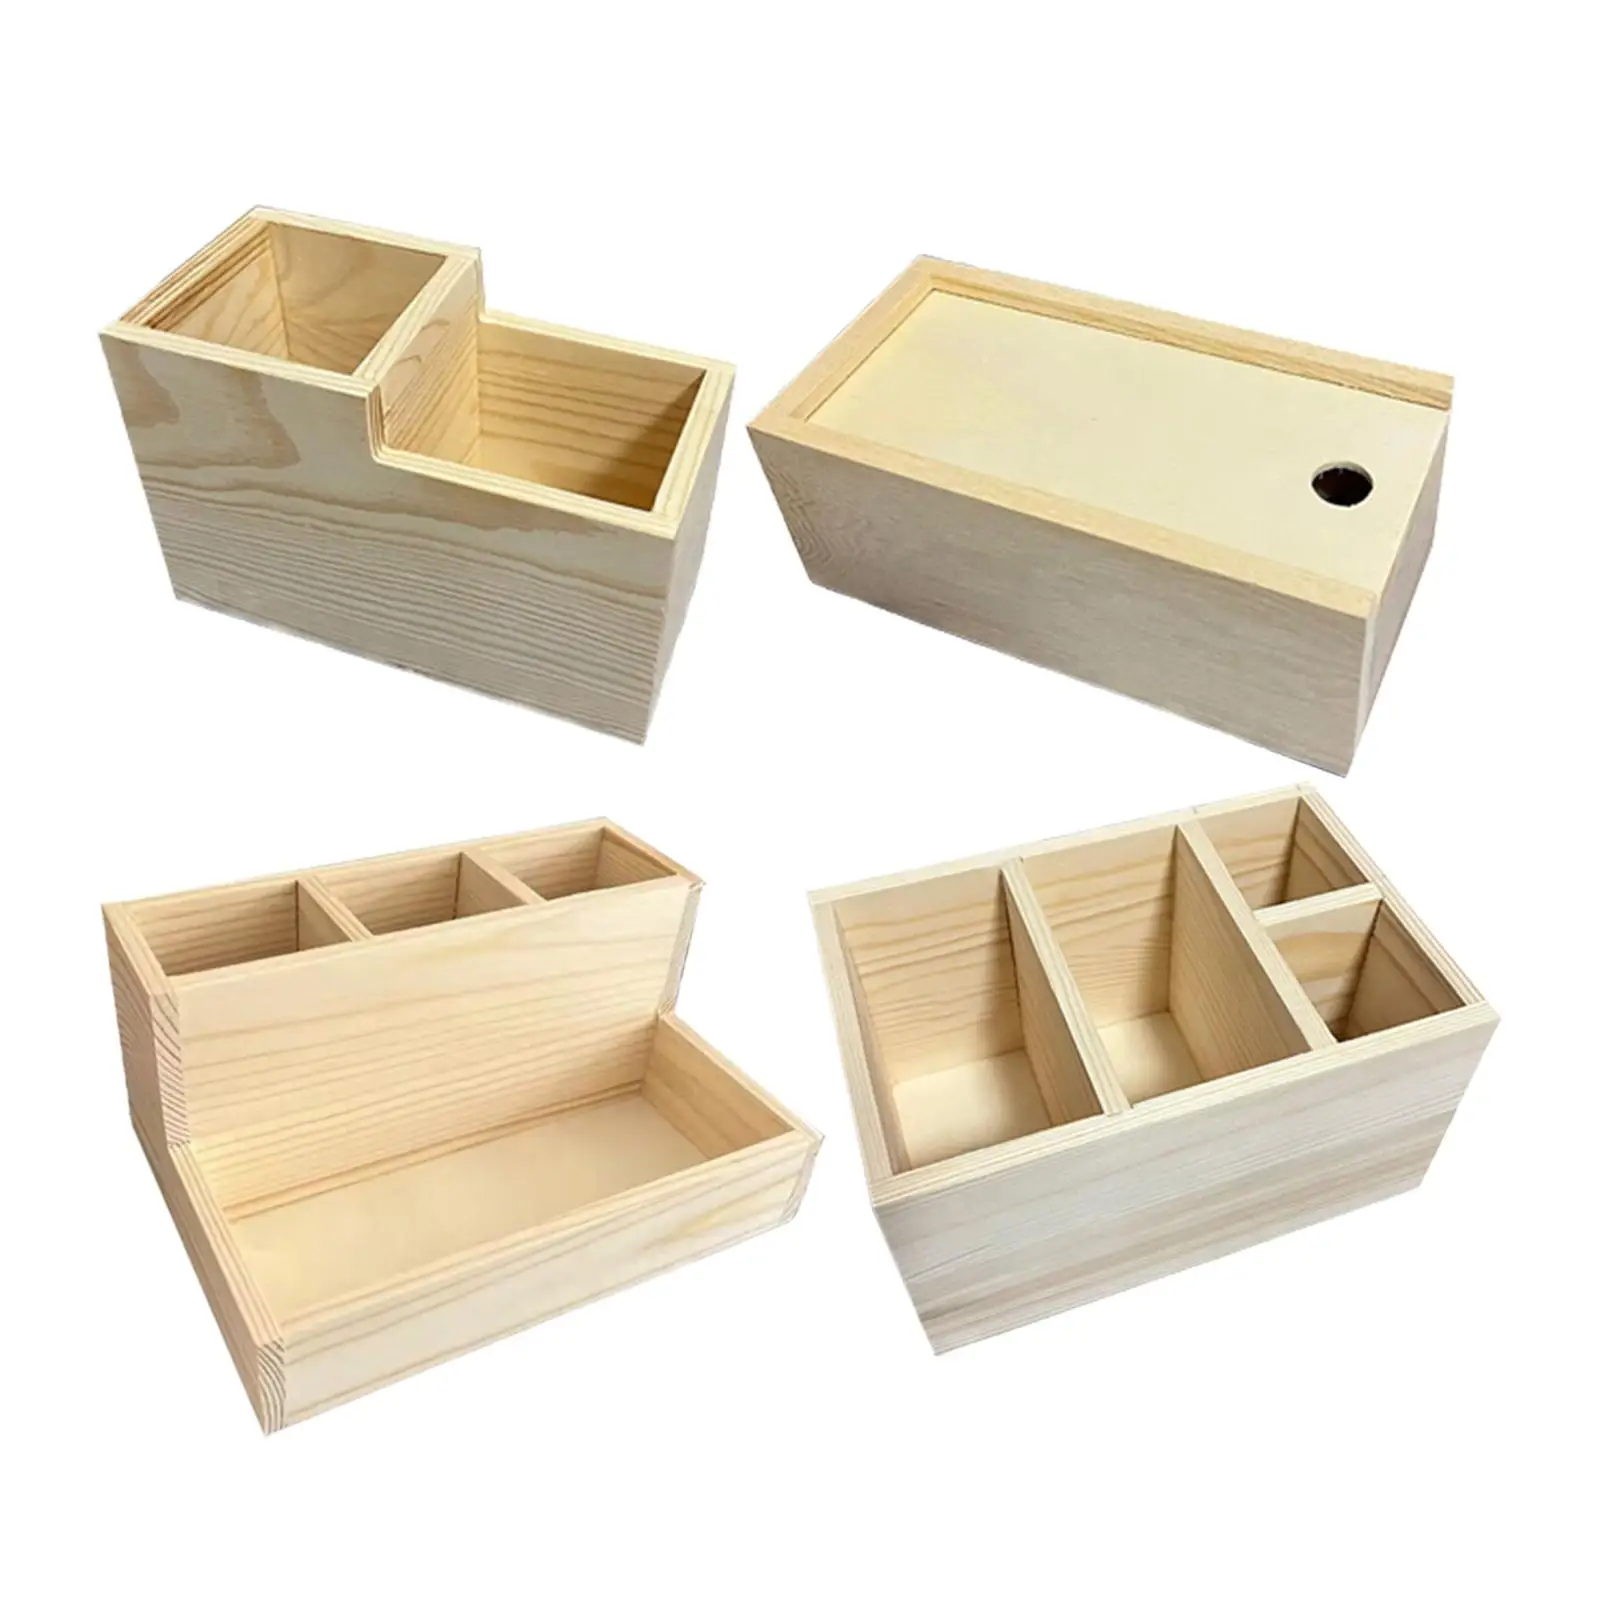 Wooden Makeup Organizer Thick Practical Stylish Desk Organizer Household Durable for Living Room Bathroom Countertop Pen